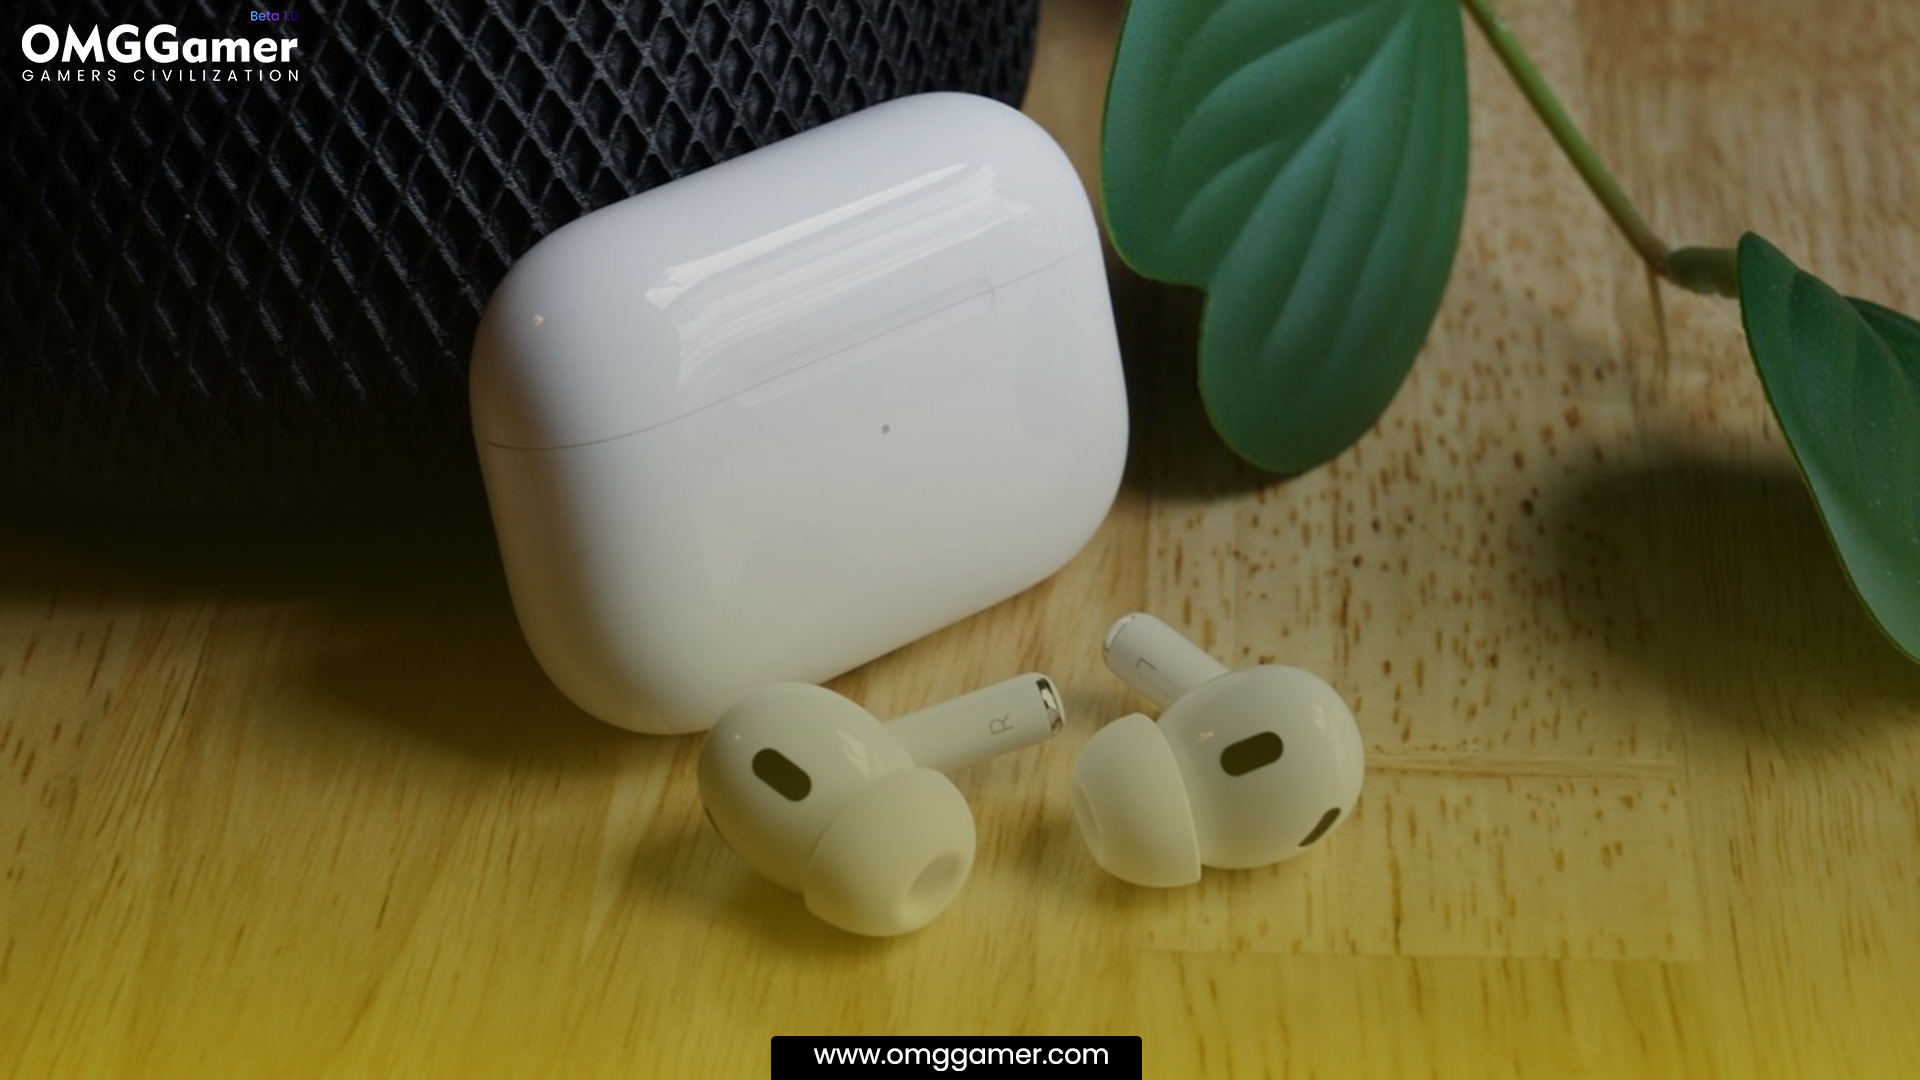 Performance: Airpods Pro 2 for Gaming